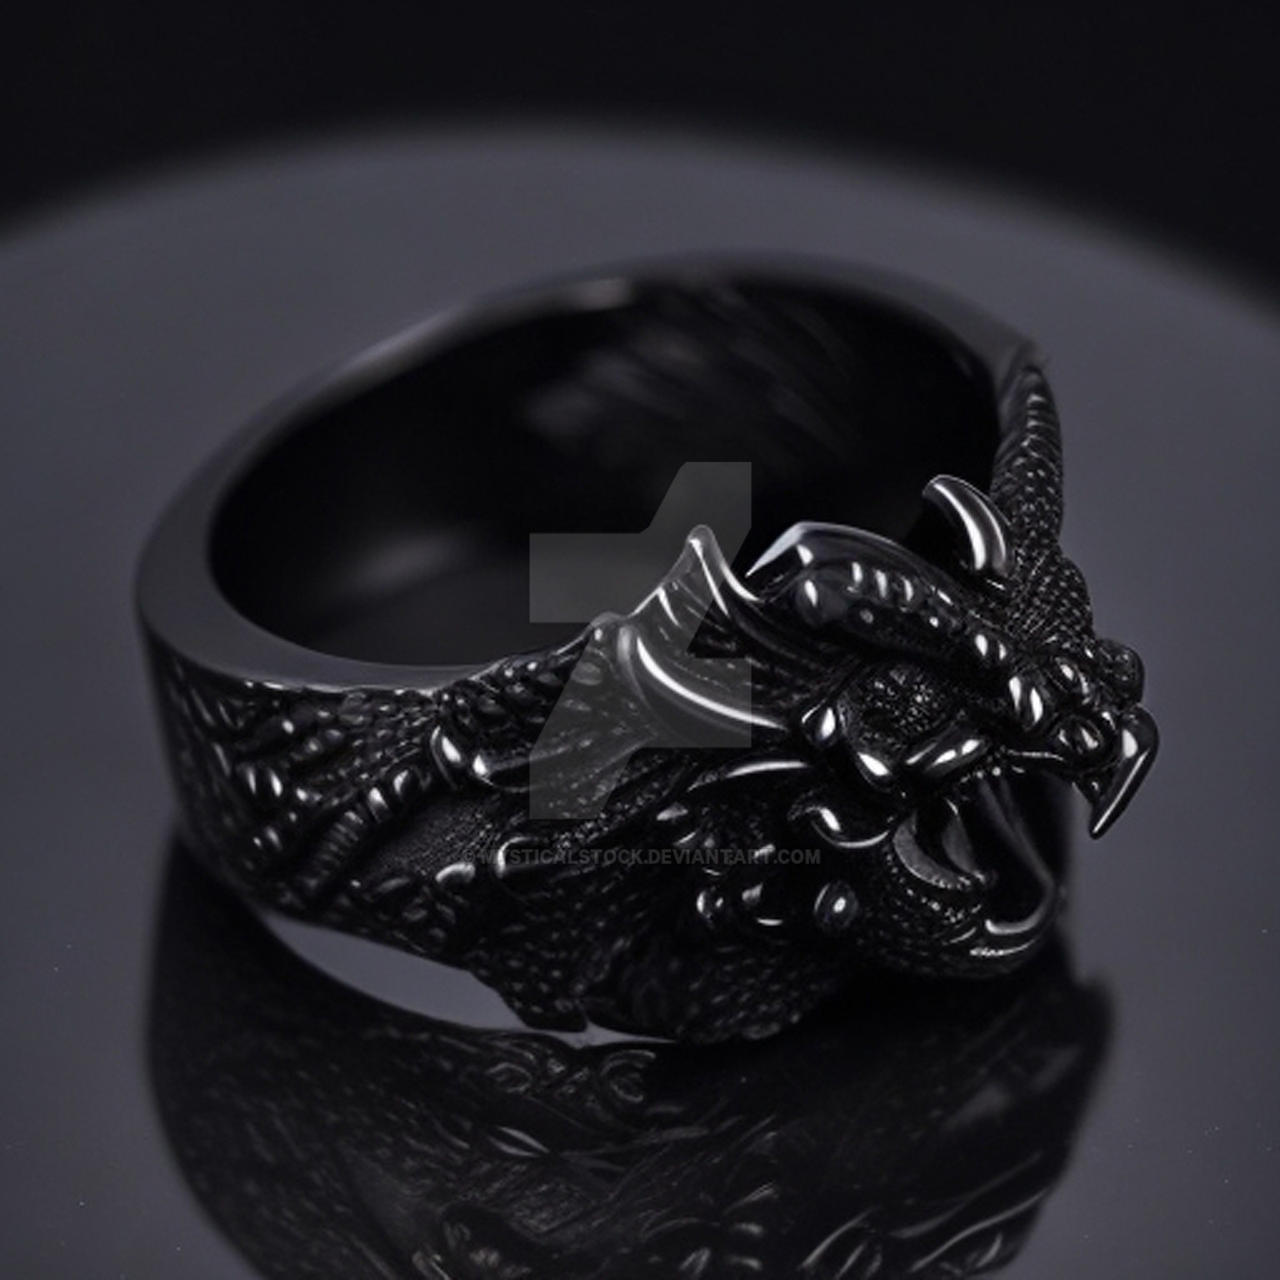 Black Dragon Ring - Photography Stock 005 by MysticalStock on DeviantArt